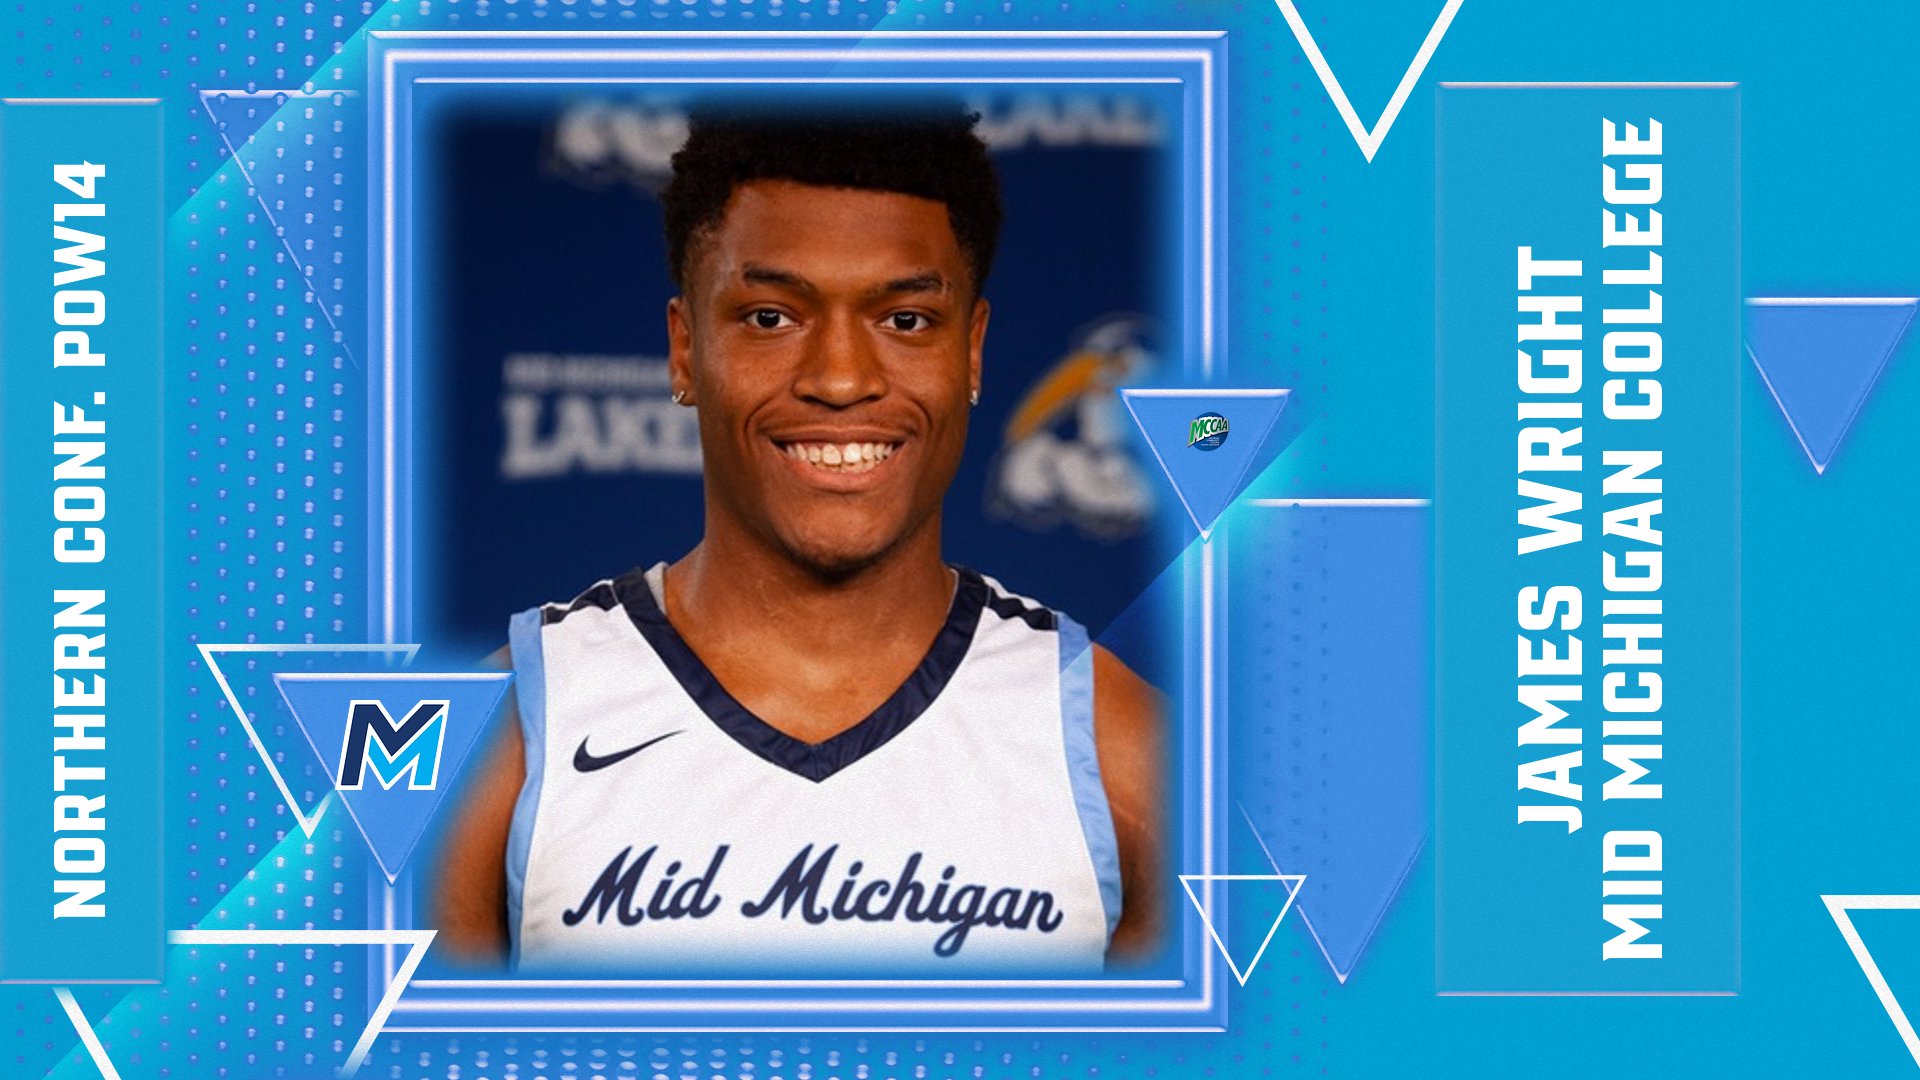 Mid Michigan's Wright Selected MCCAA Northern Conference Men's Basketball Player of the Week14